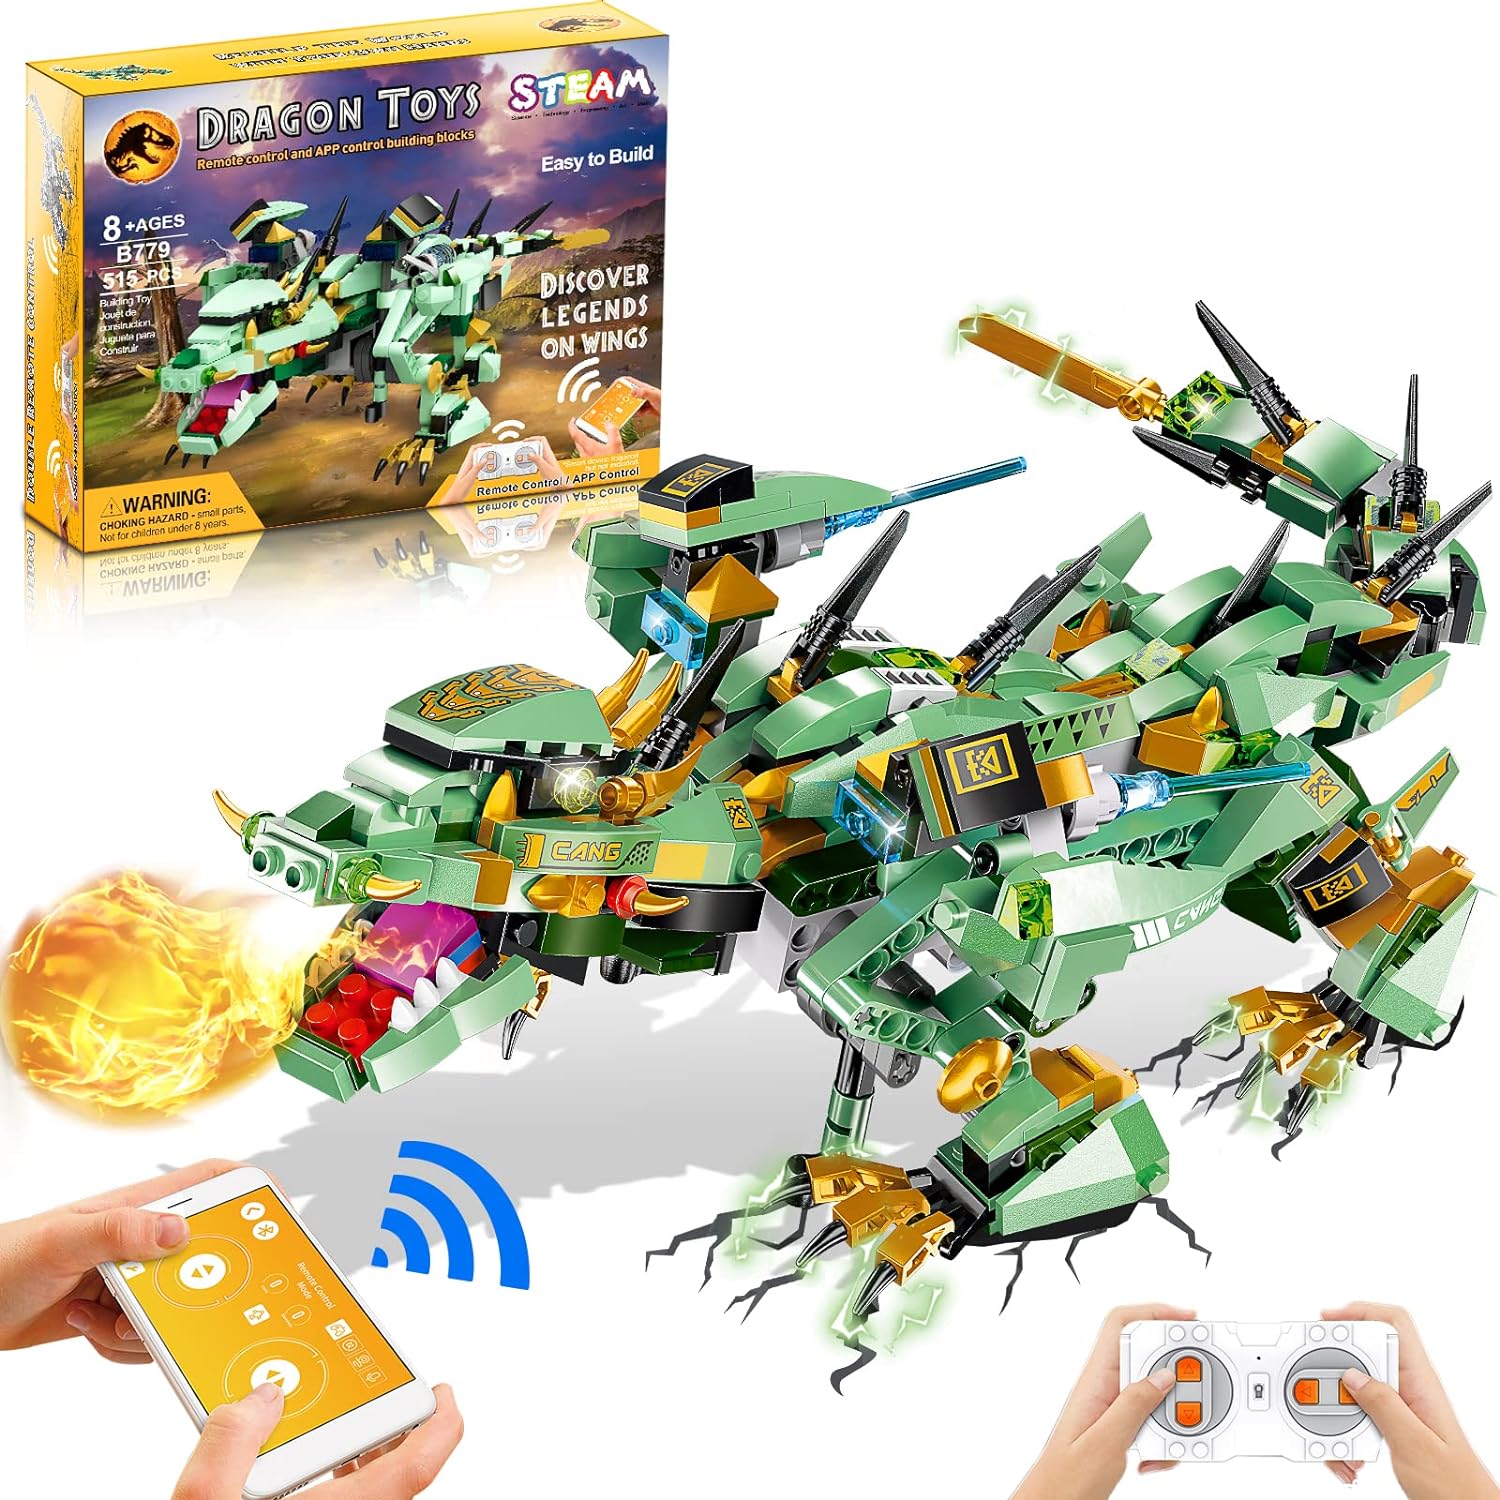 Sillbird Remote&APP Control Dragon Robot Building Kit, STEM Projects for Kids Age 8-12-16, Educational STEM Birthday Gifts Toys for 8 9 10 11 12 Year Old Boys Girls (515 Pieces)